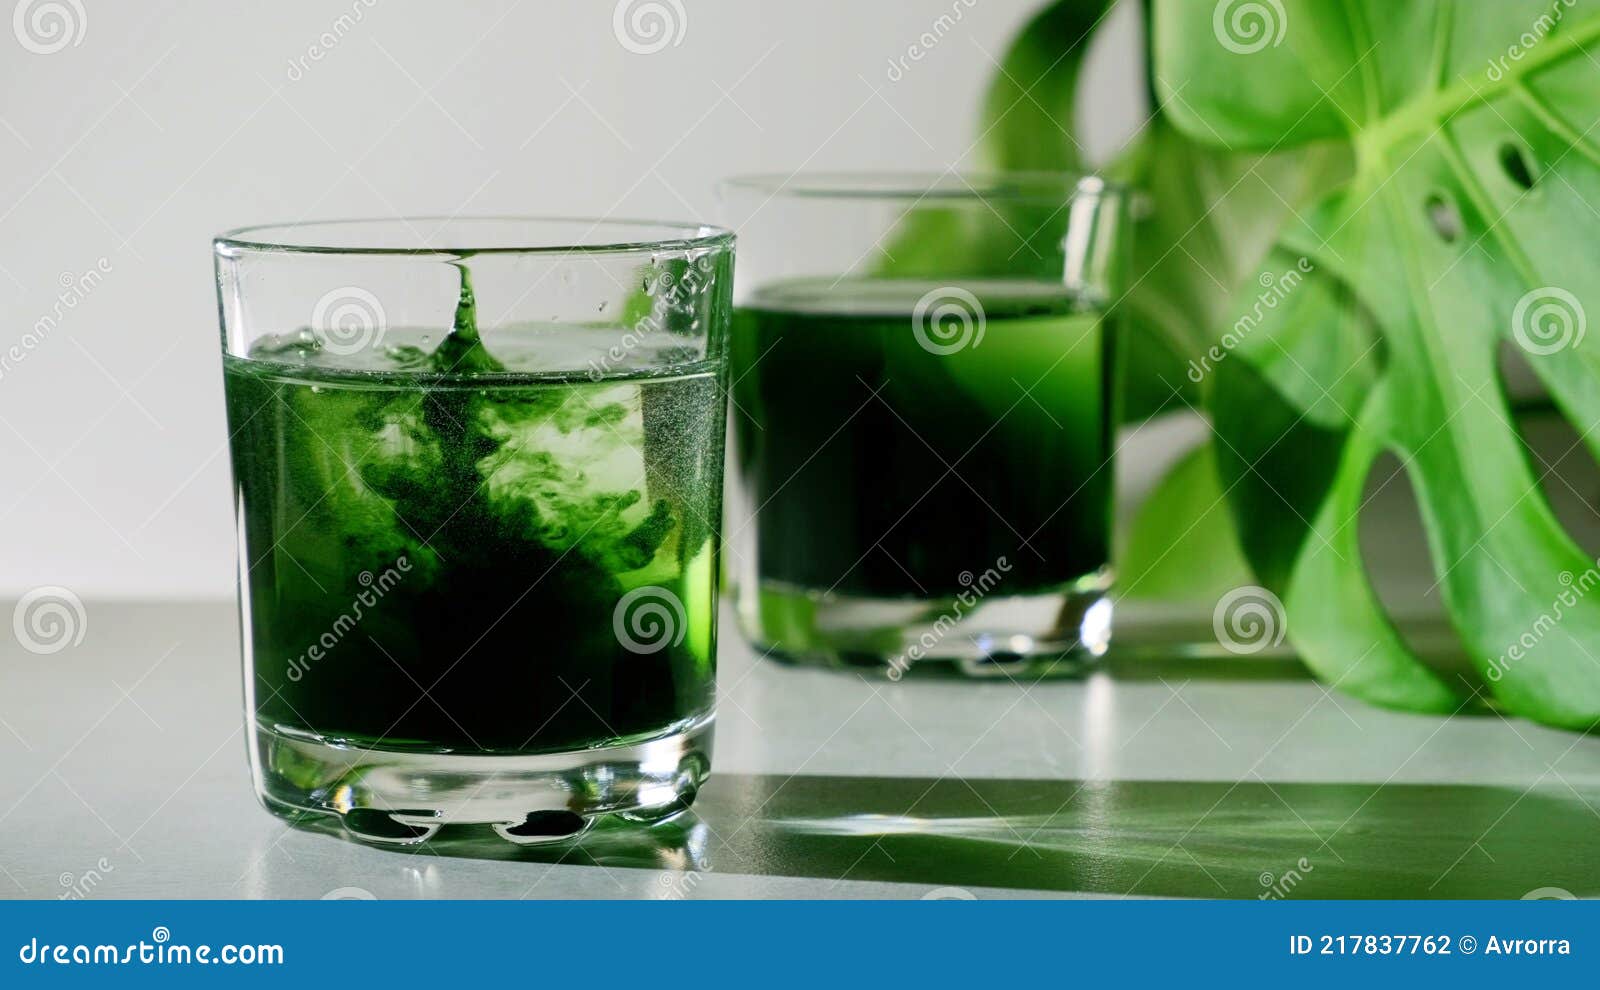 chlorophyll extract is poured in pure water in glass against a white grey background with green leaf